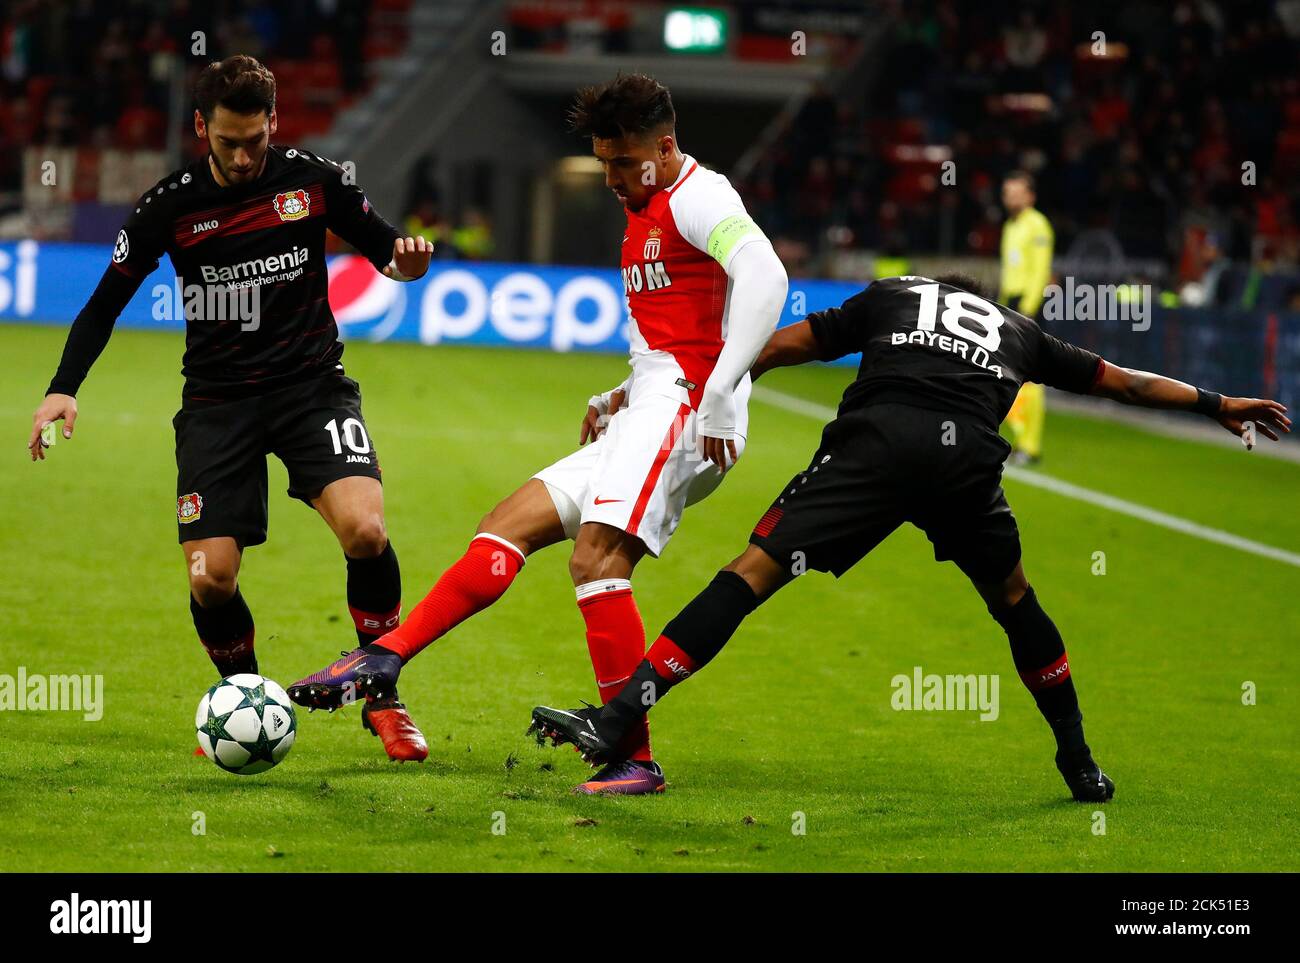 Football Soccer - Bayer 04 Leverkusen v AS Monaco - UEFA Champions League  Group Stage - Group E - BayArena, Leverkusen, Germany - 07/12/16 - Bayer 04  Leverkusen's Hakan Calhanoglu and Wendell